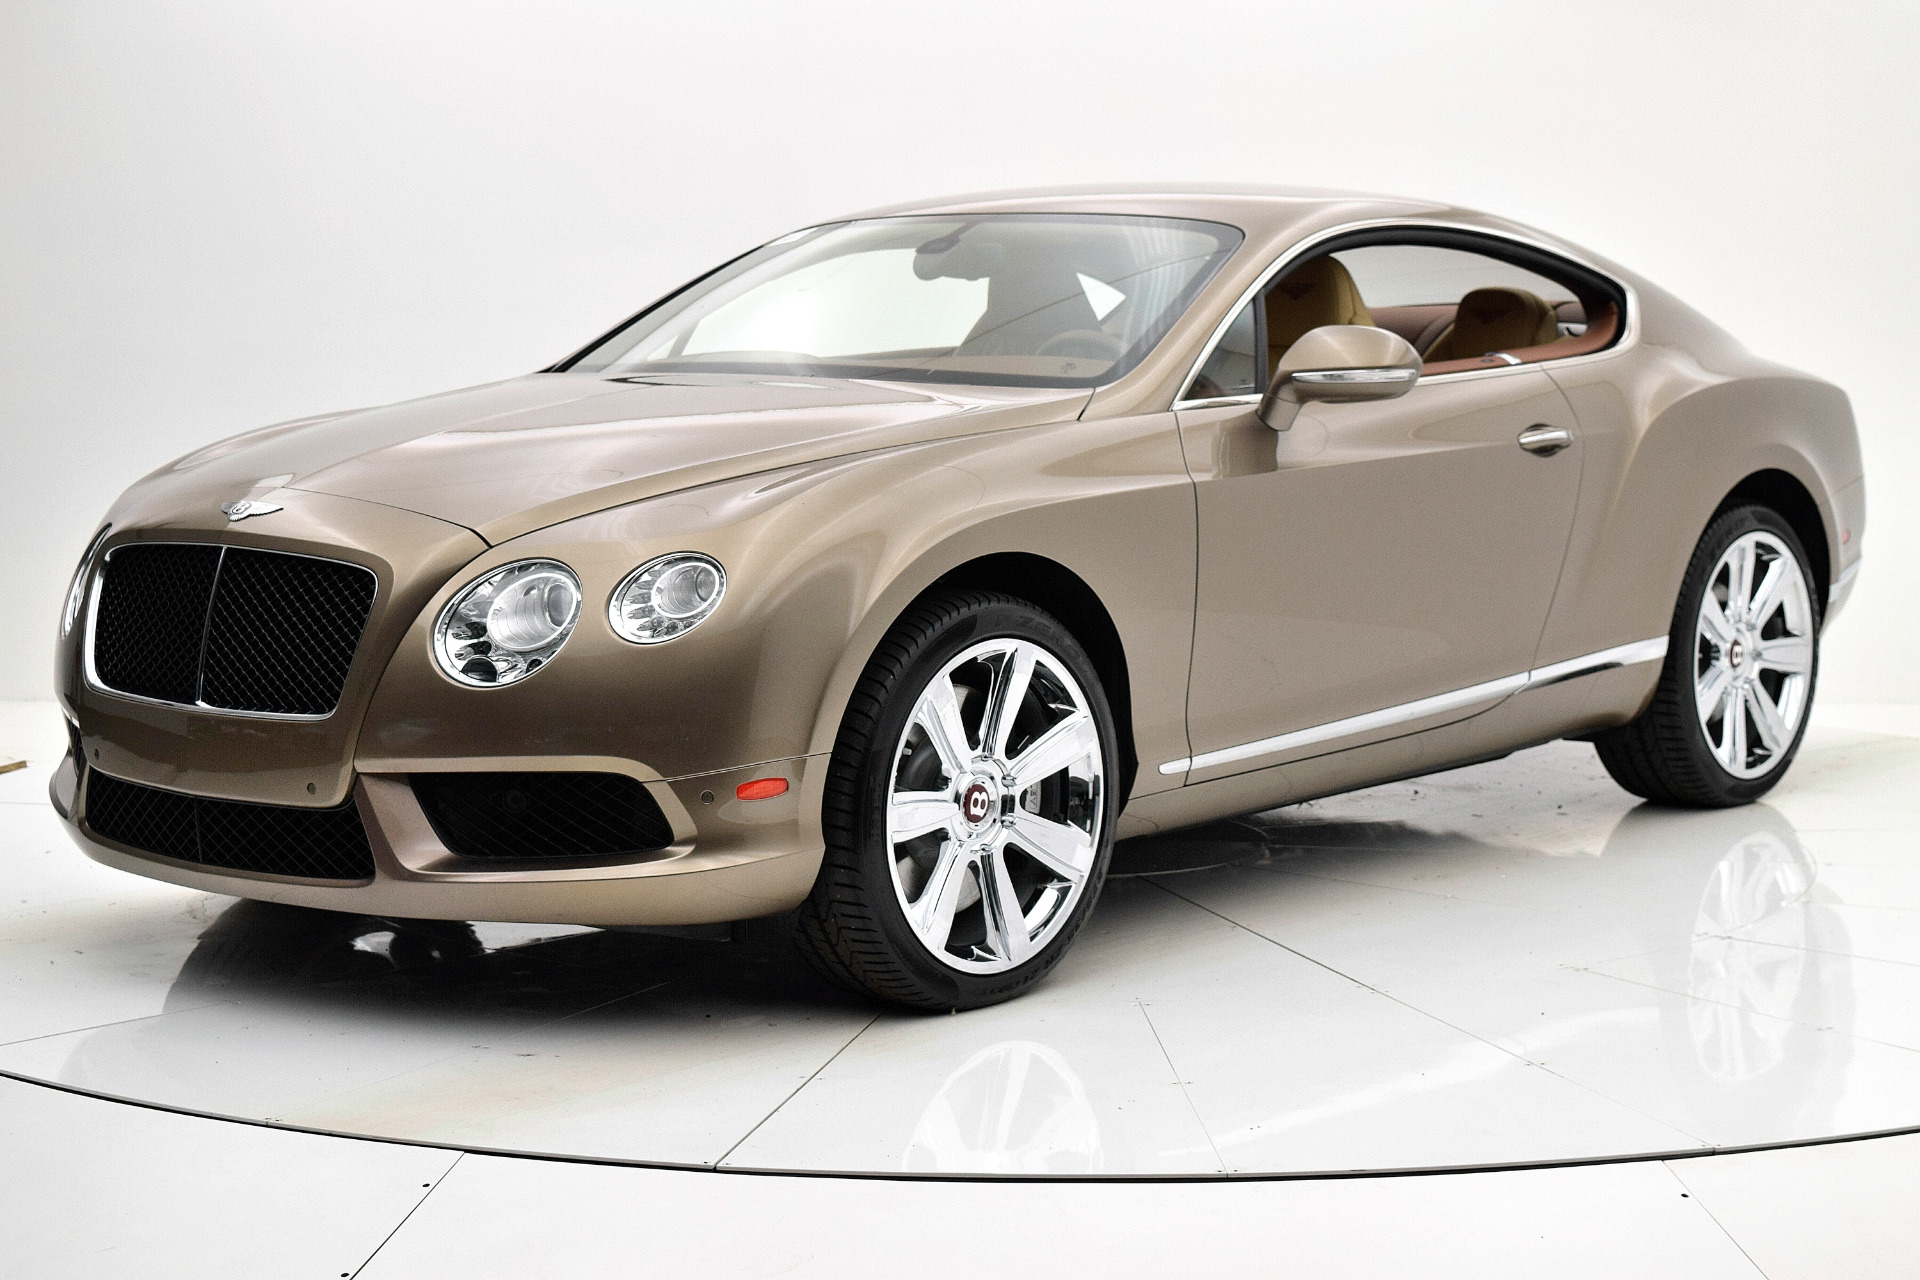 Used 2013 Bentley Continental GT V8 Coupe for sale Sold at Bentley Palmyra N.J. in Palmyra NJ 08065 2